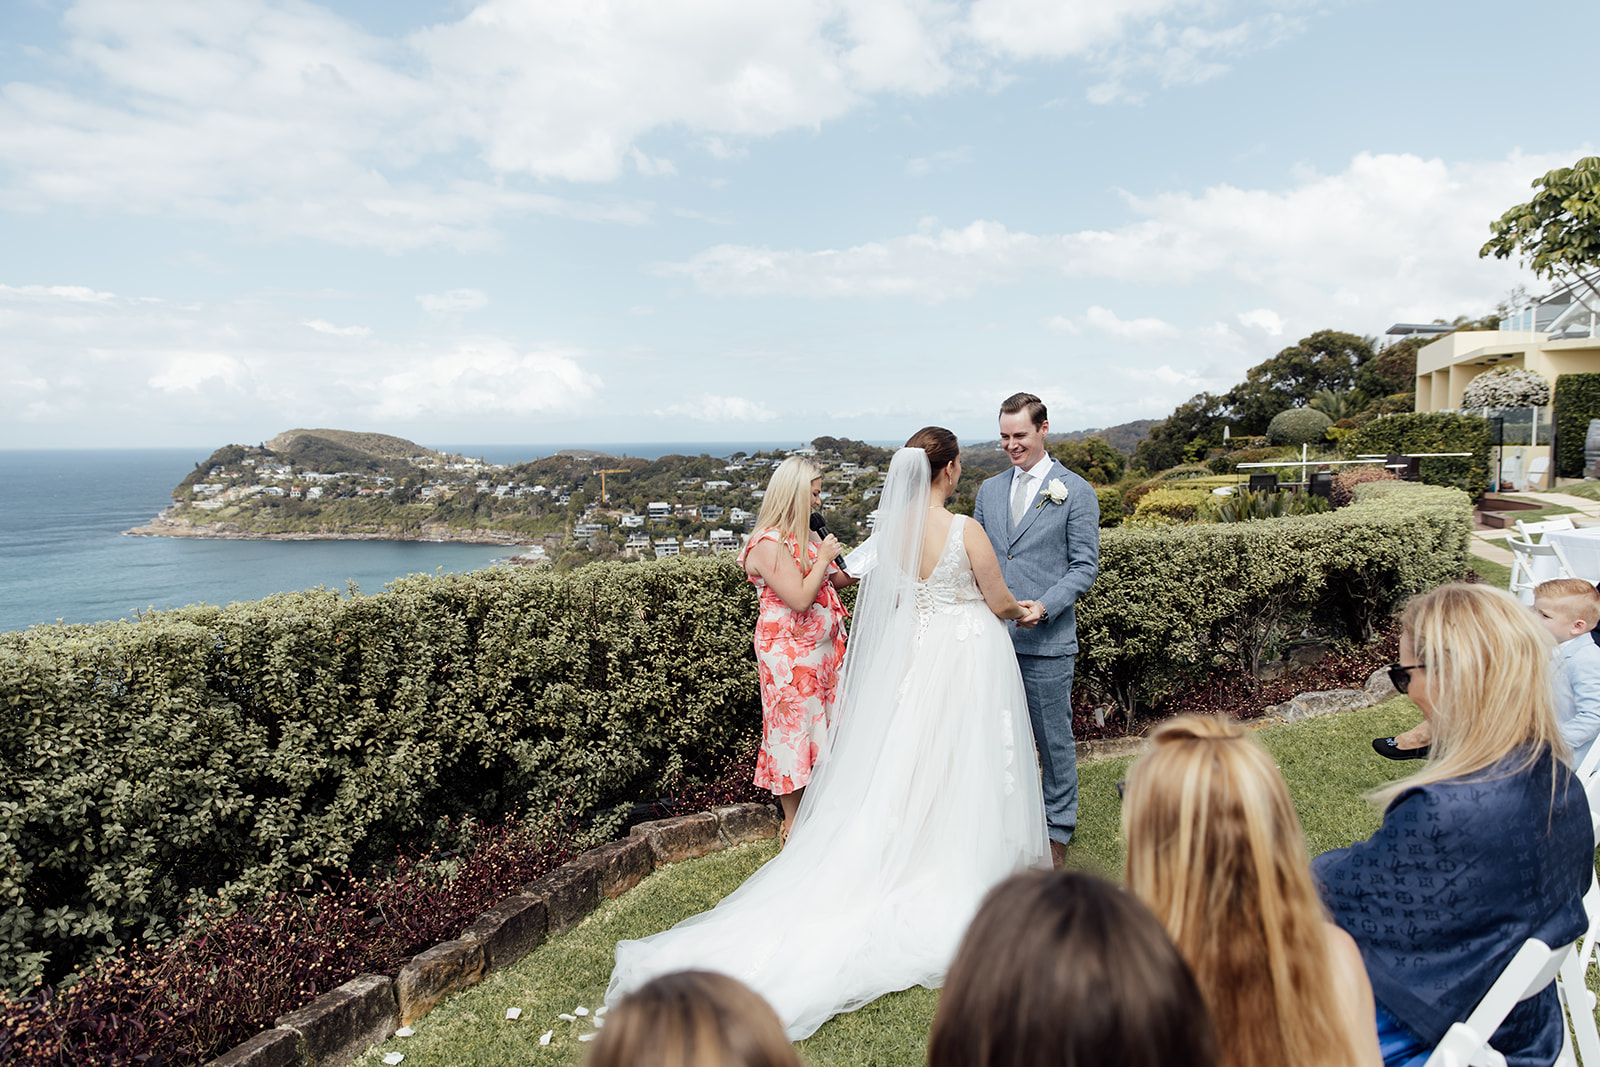 A wedding ceremony at Jonah's whale beach